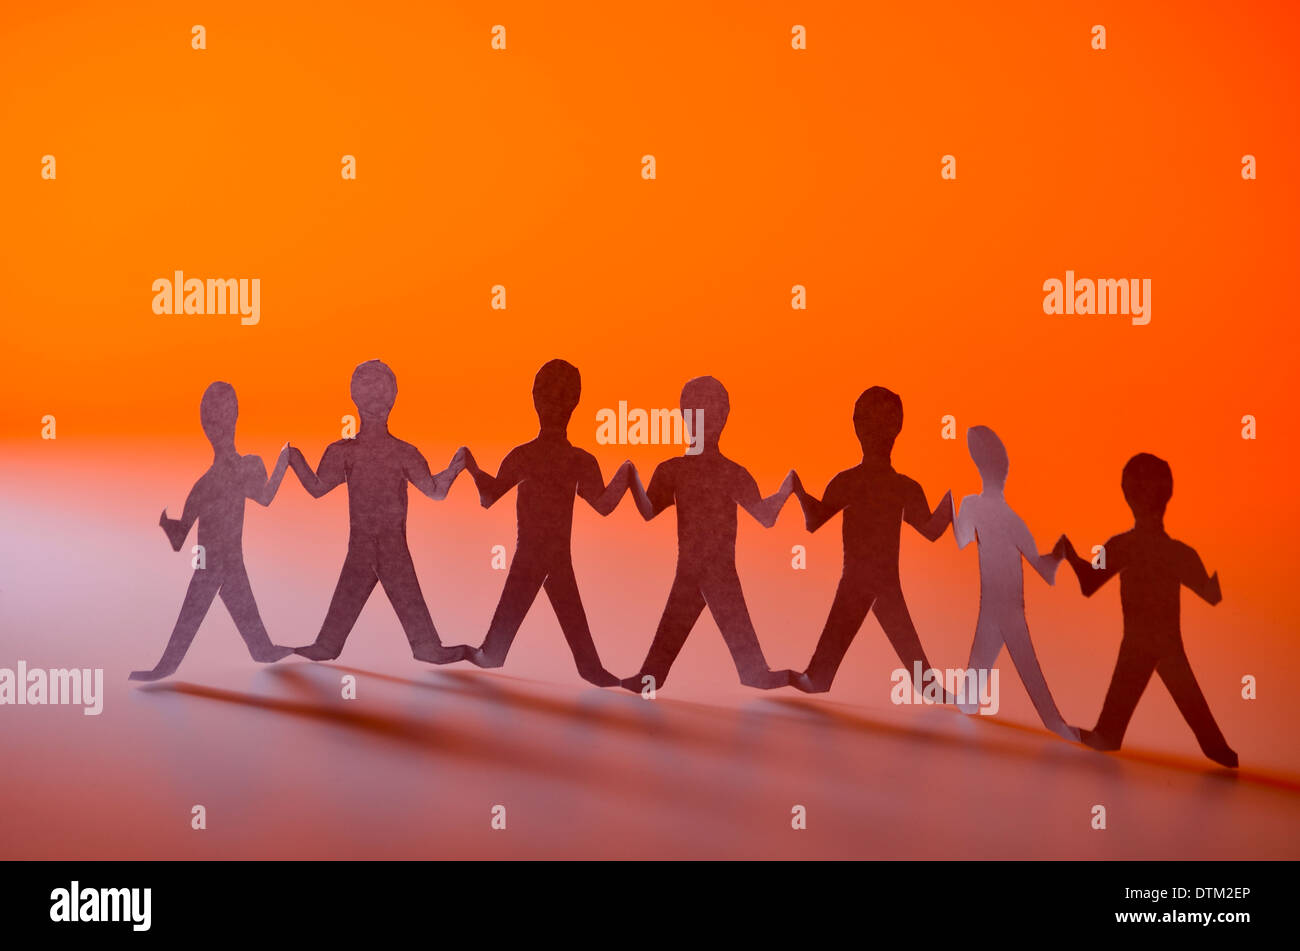 Close up of a paper chain people with shadow and orange background Stock Photo